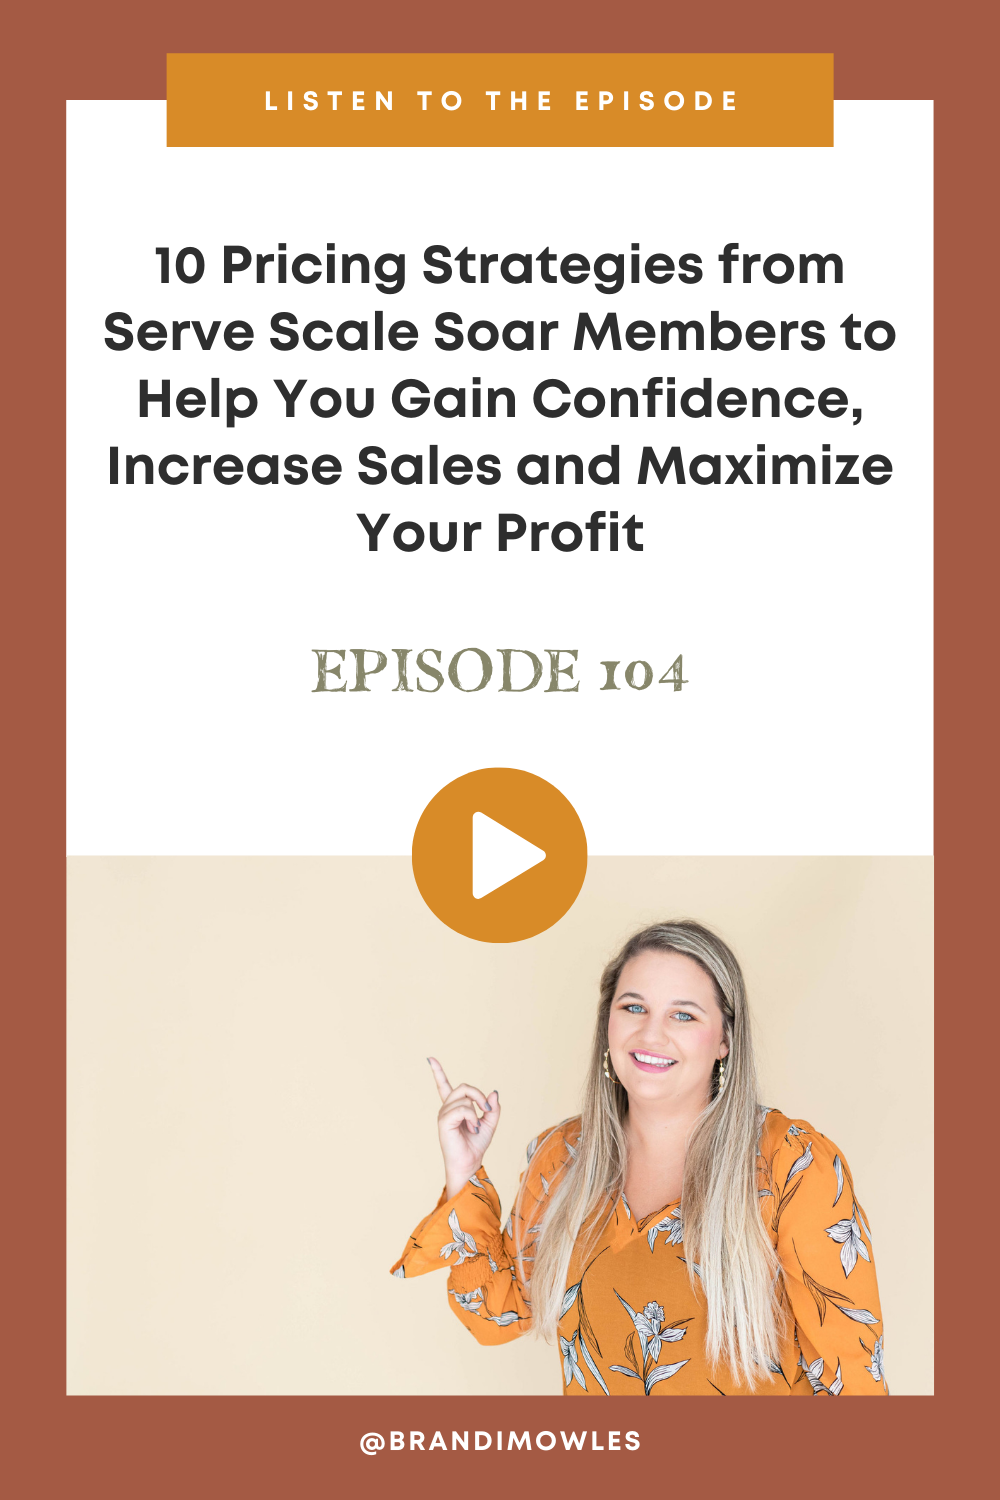 Increase Sales and Maximize Your Profit